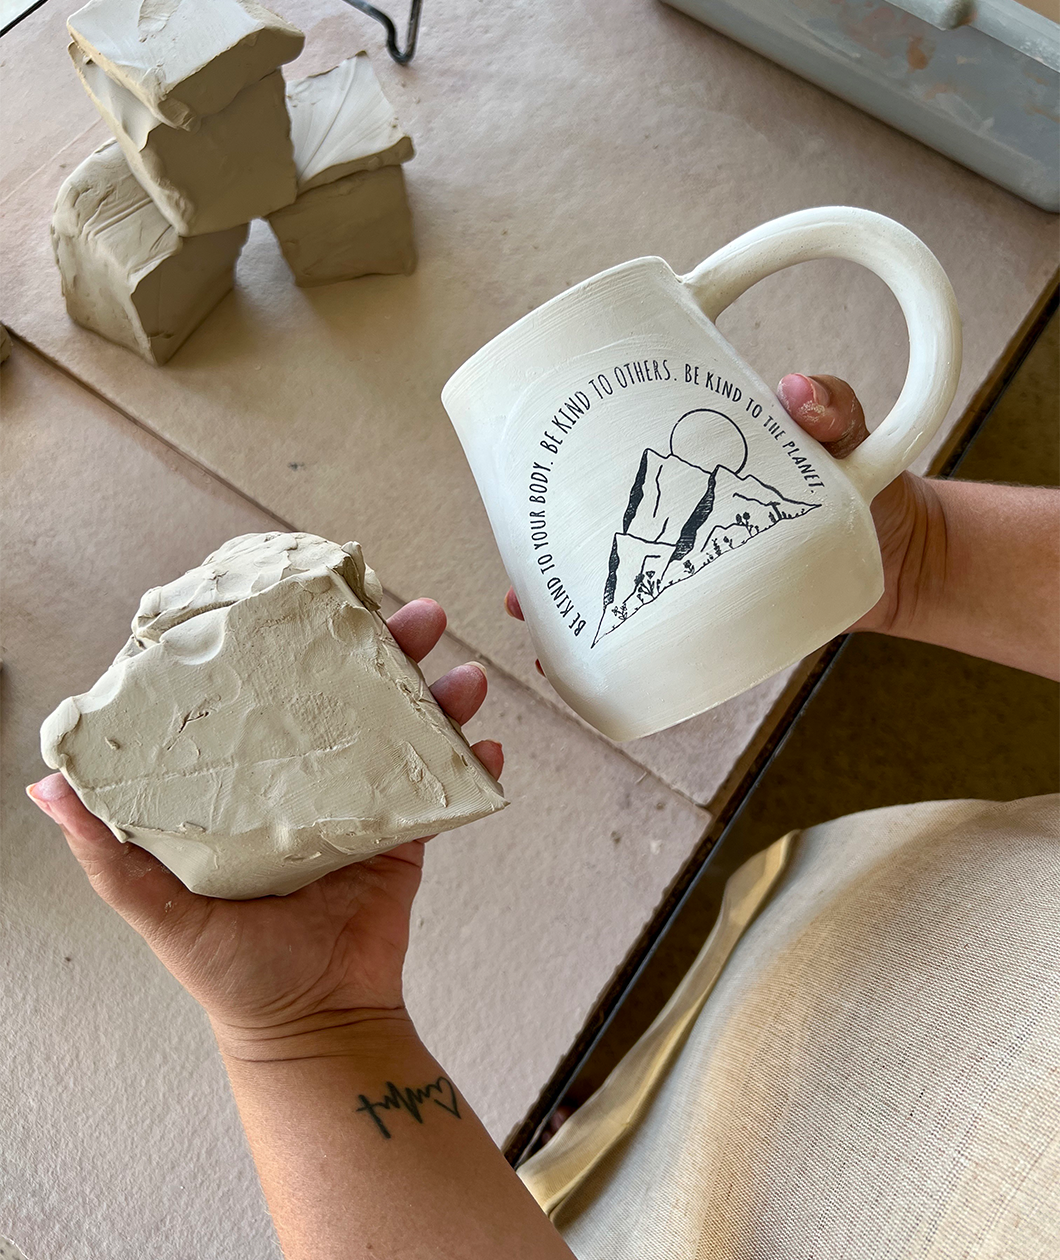 The Be Kind mug from Sierra Schultzzie in the unfinished form with a lump of clay next to it. The mug is beige with mountains and a moon. The text curves around the mountains and says "Be kind to your body be kind to others be kind to the planet".